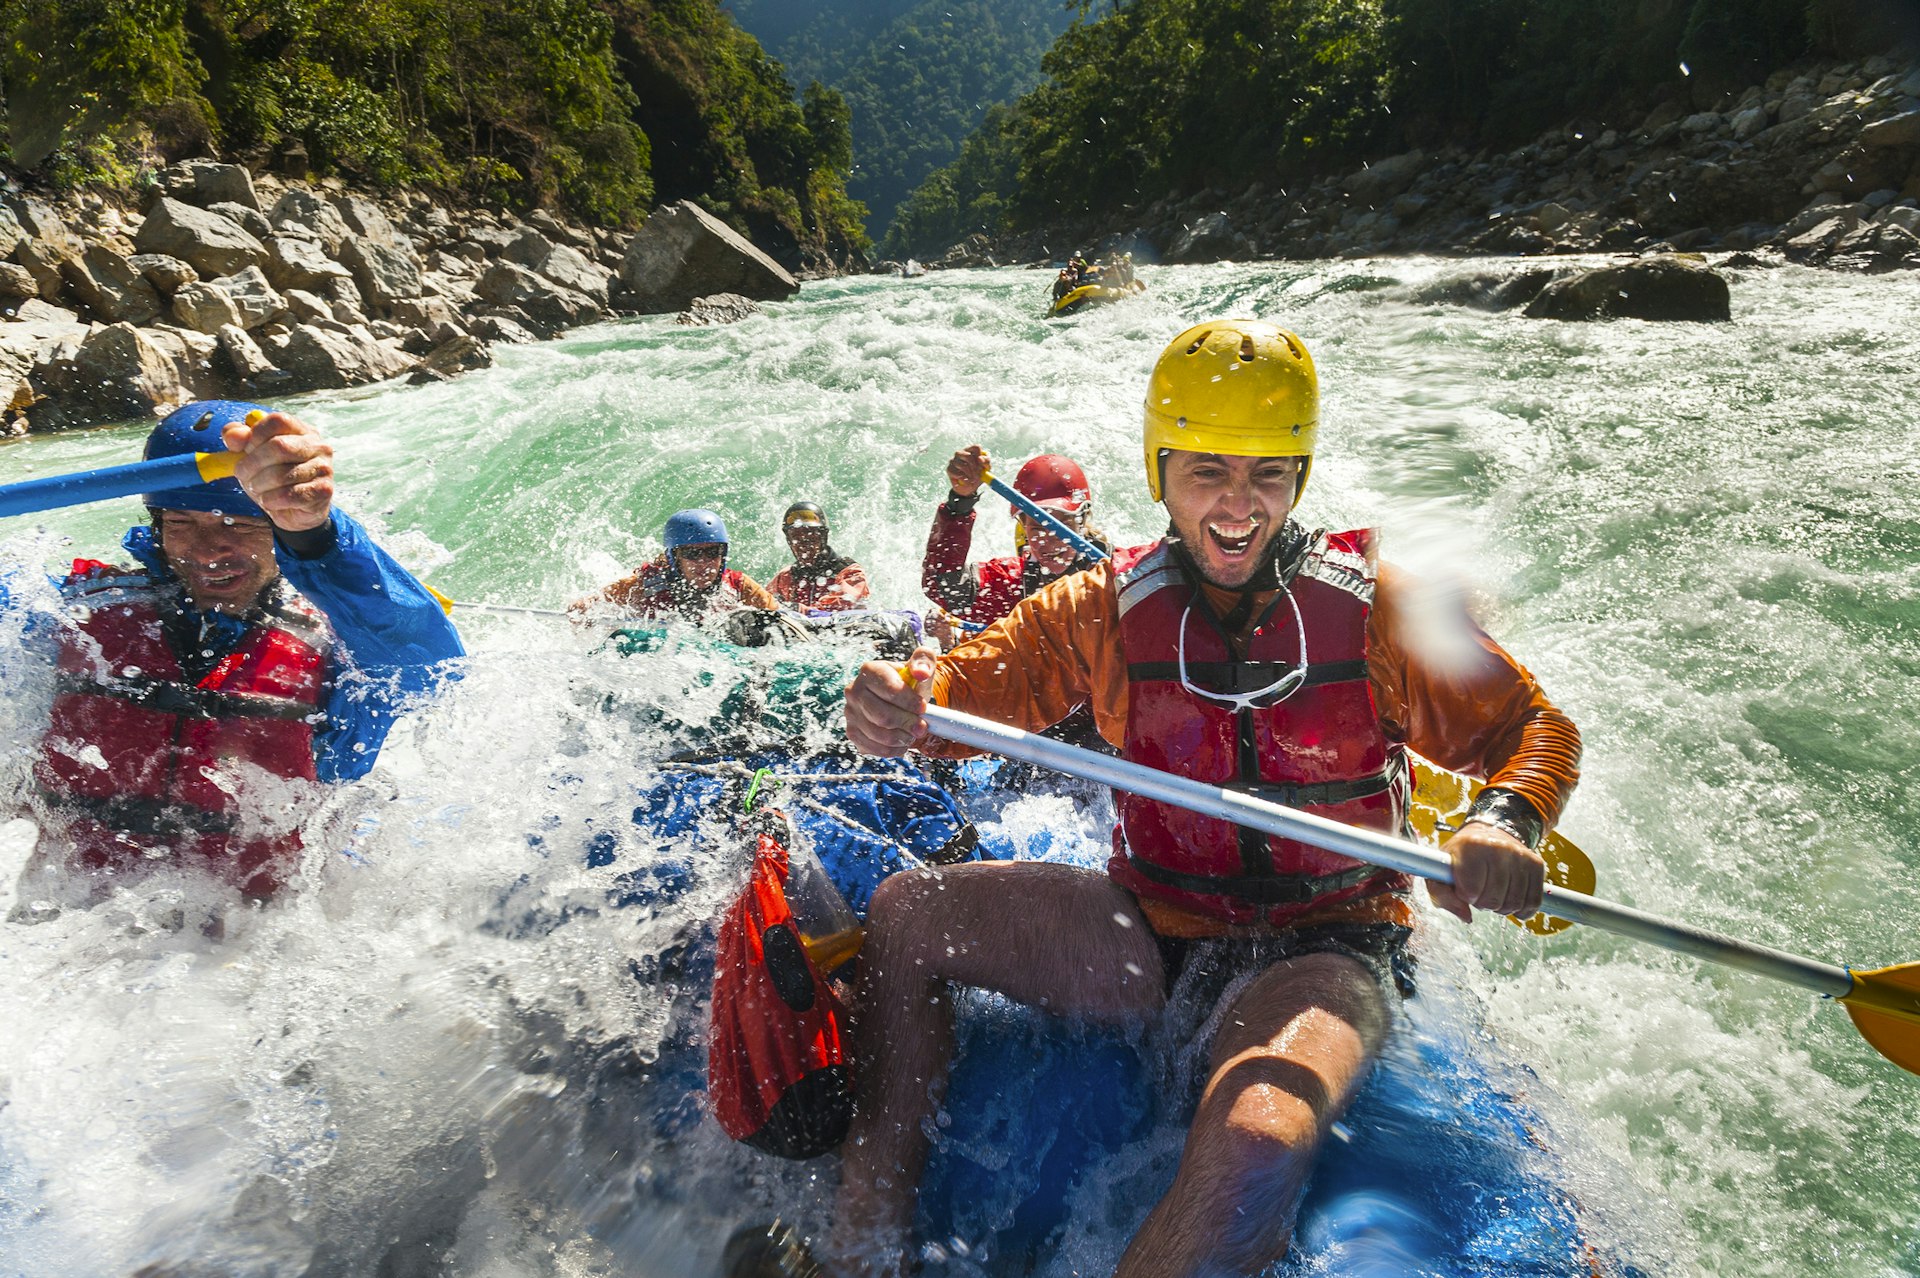 Rafters wearing safety gear and helmets get splashed as they go through some big rapids on a river 